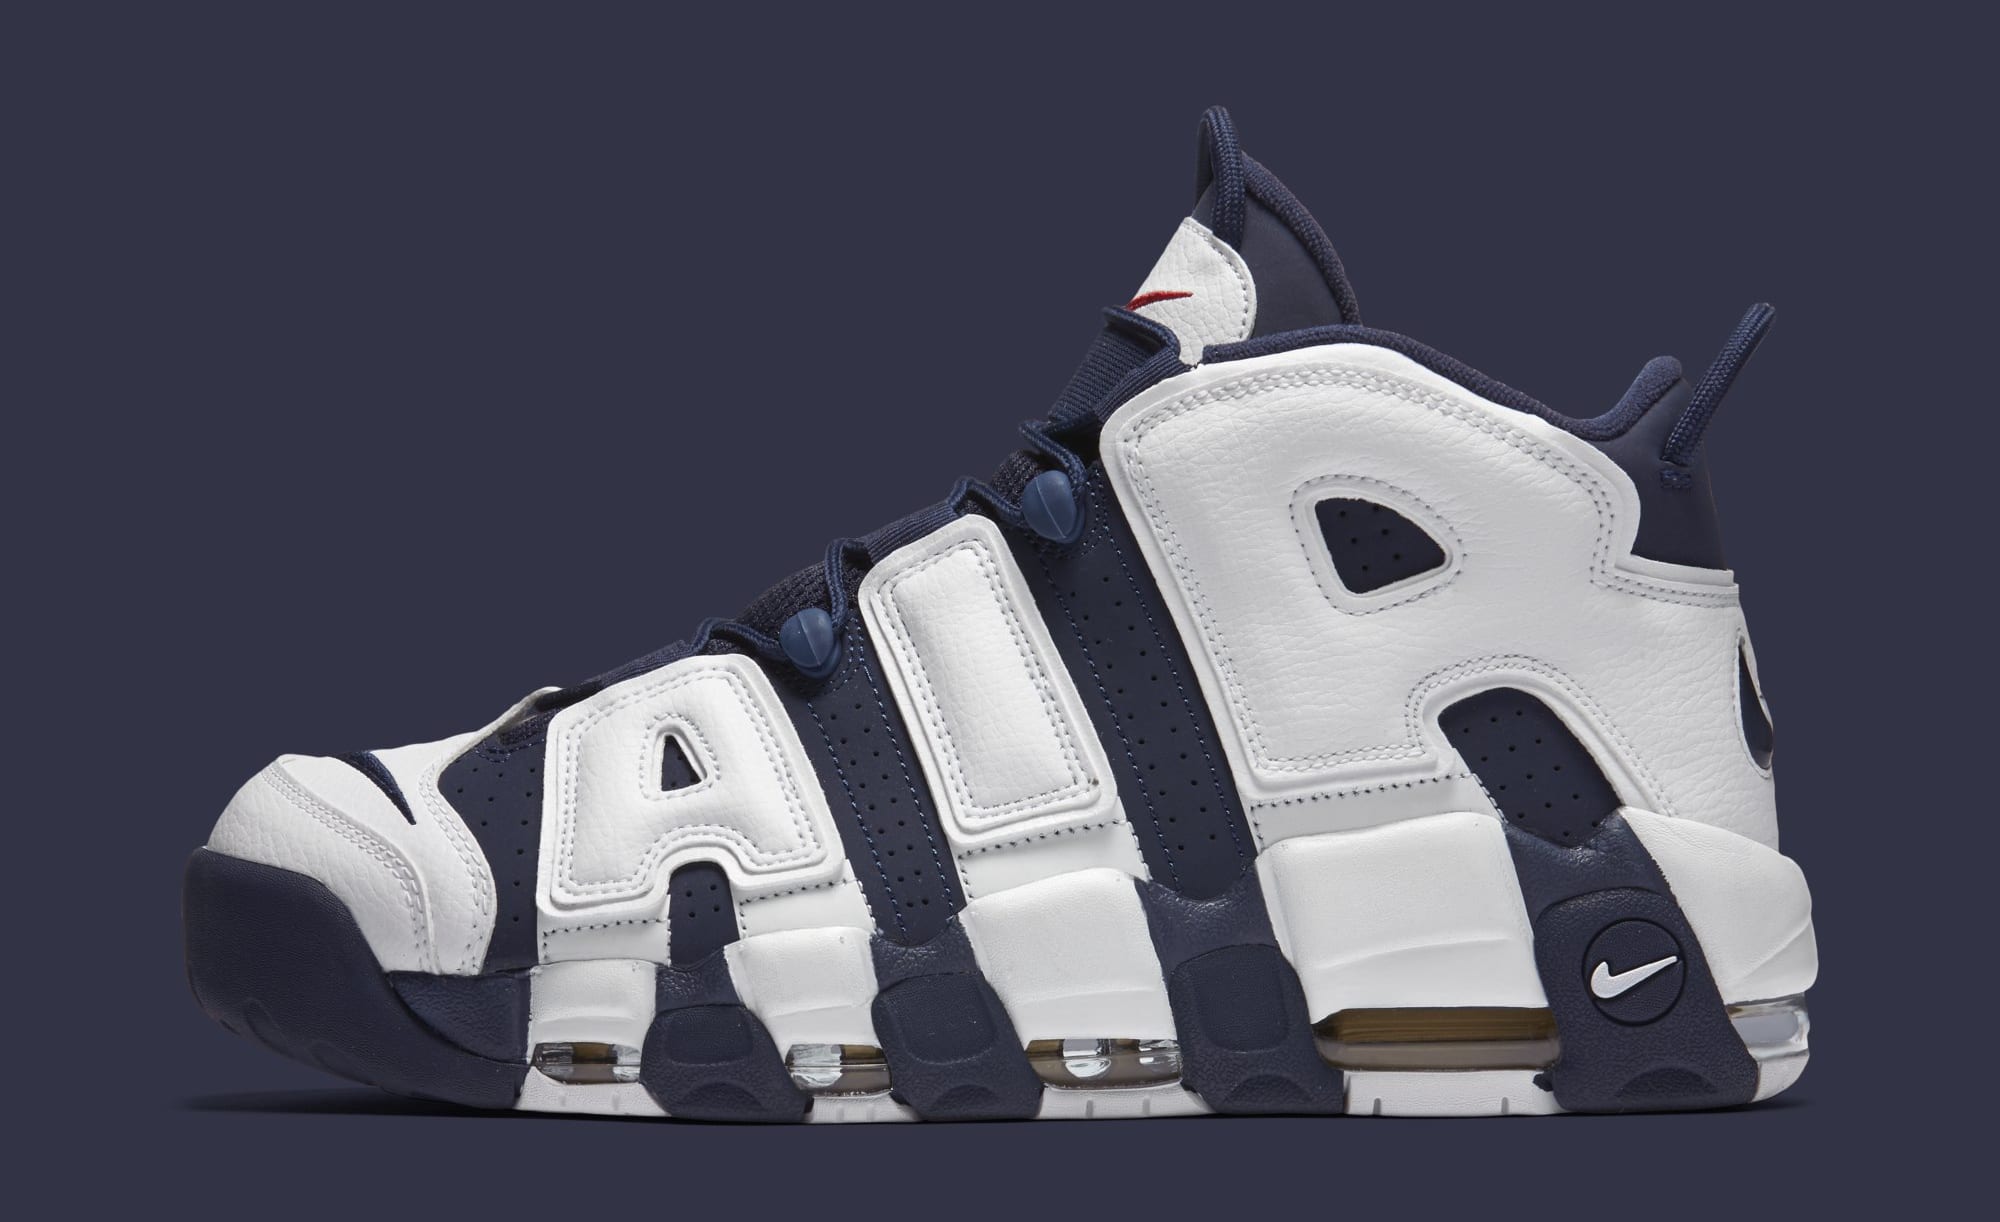 The Nike Air More Uptempo Olympic Arrives Next Week •